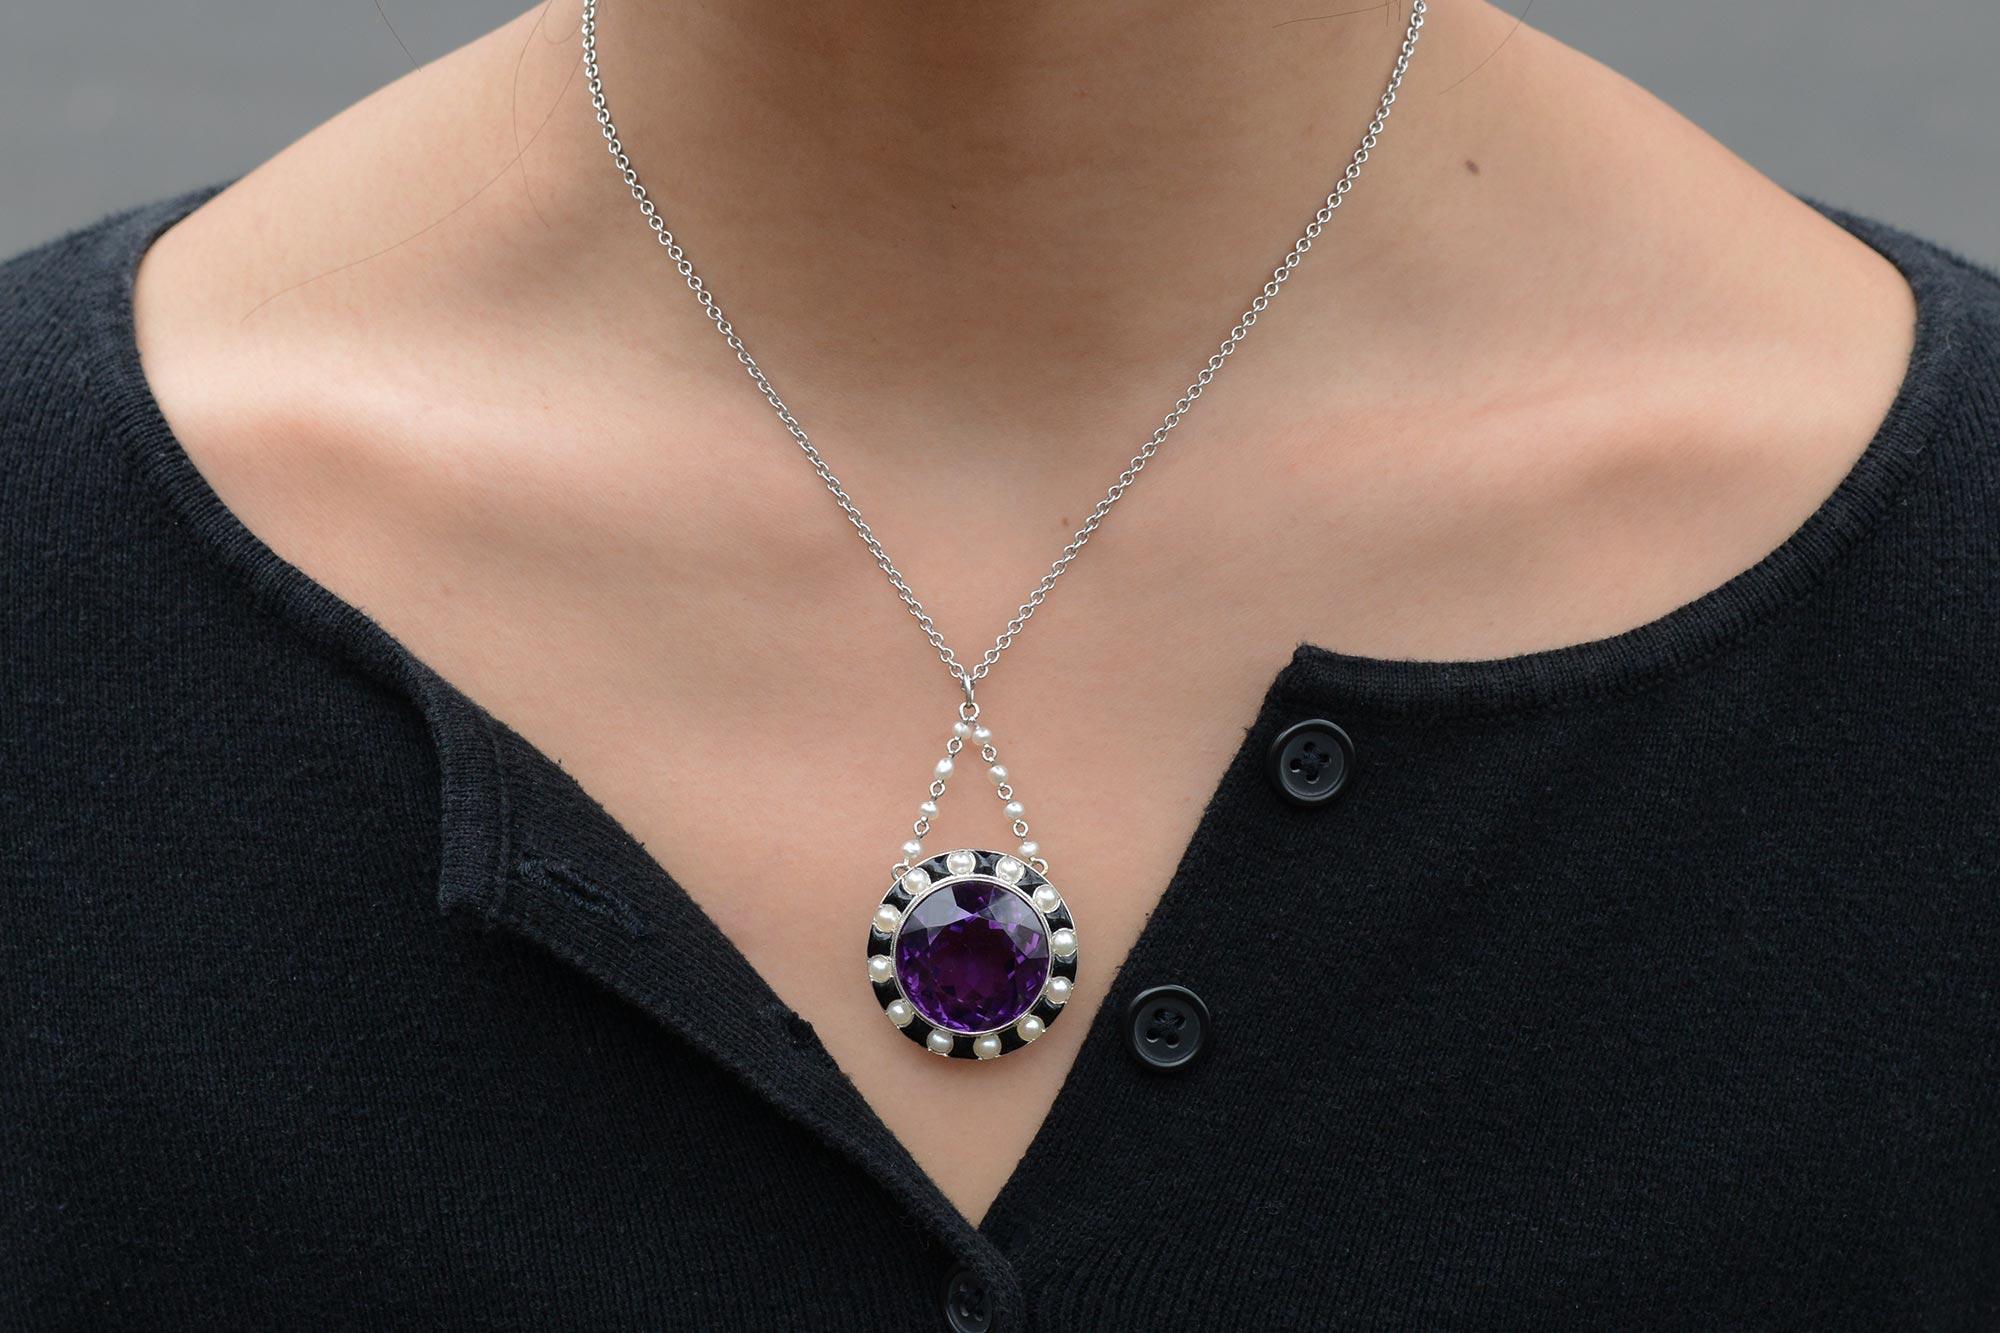 This stunning Art Deco necklace boasts the iconic style of the Jazz Age. Centered by a dazzling, rich violet amethyst of an impressive 30 carats.  The classic 